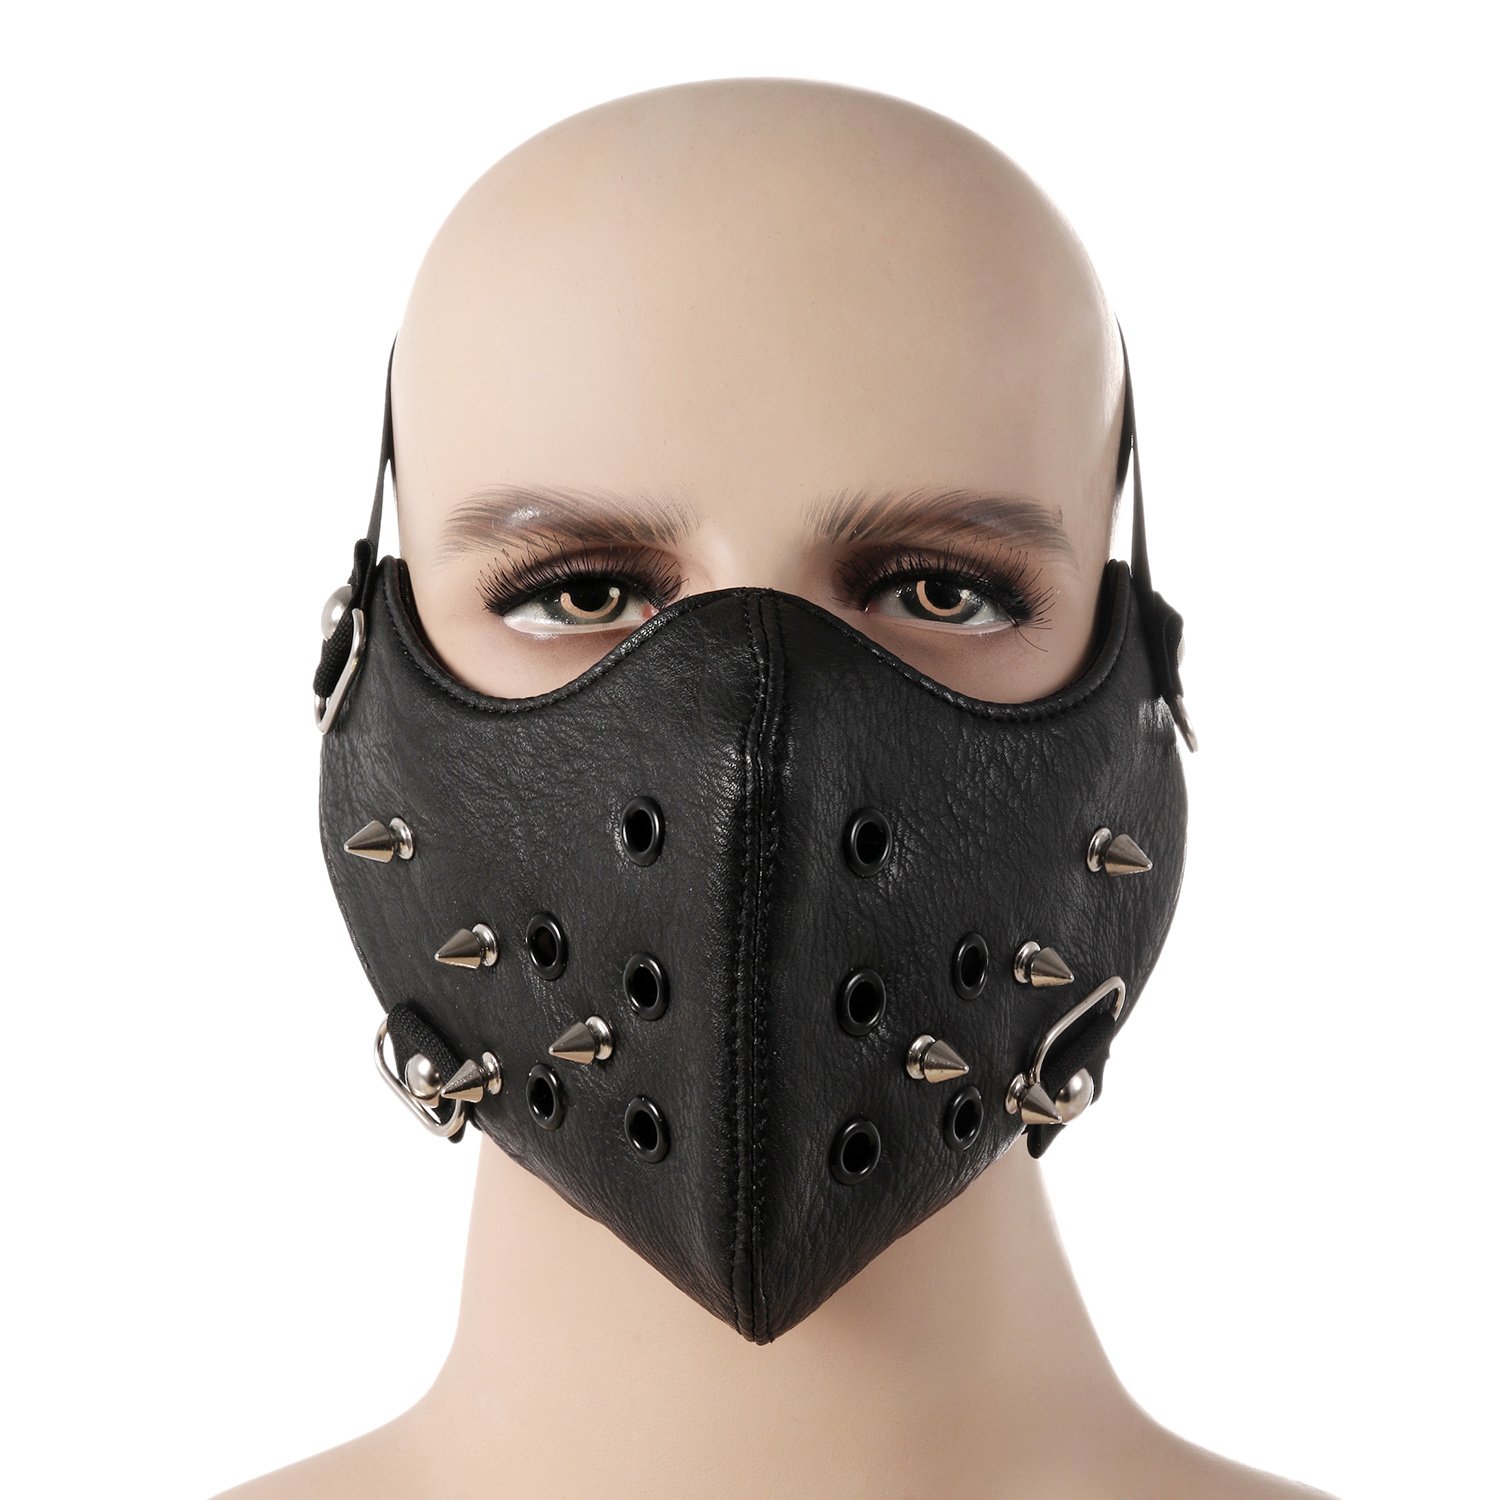 TSWRK Punk Faux Leather Mask, Wind Protector Motorcycle Biker Half Face Mask, Anti-Dust Sport Mask Halloween Costume